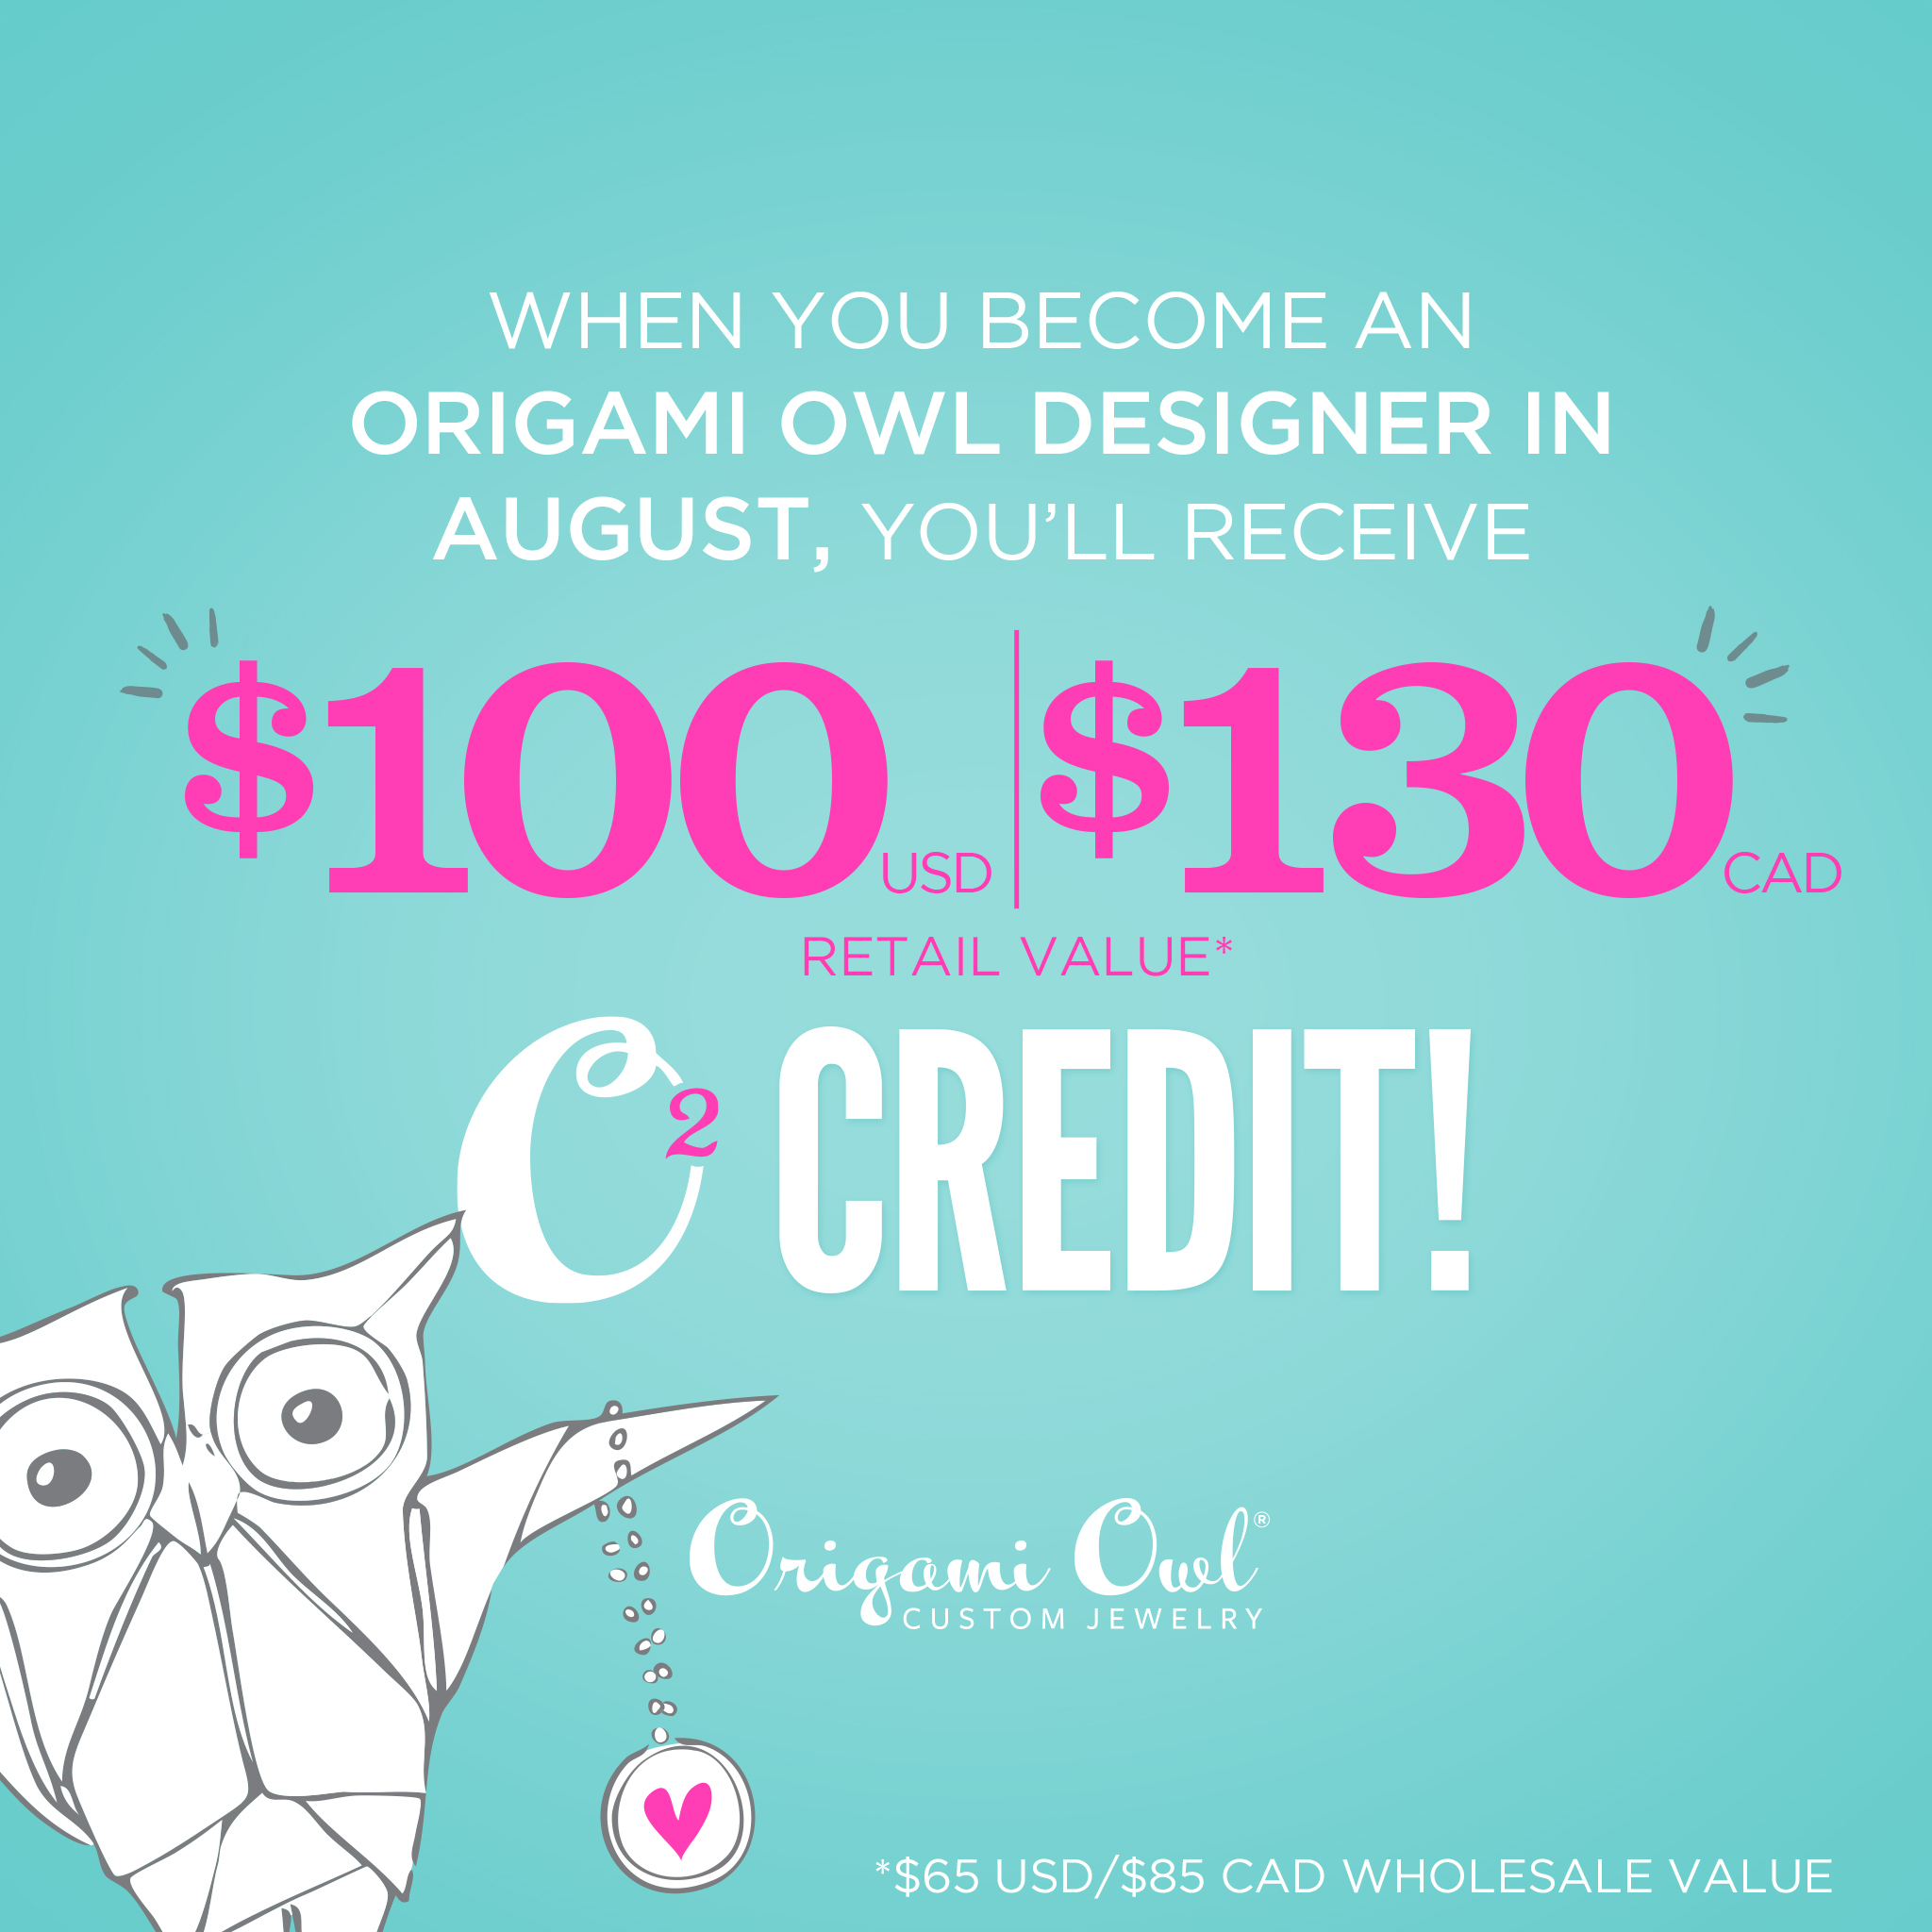 Origami Owl Designer Login New August Exclusives To Capture The Hearts Of Your Customers